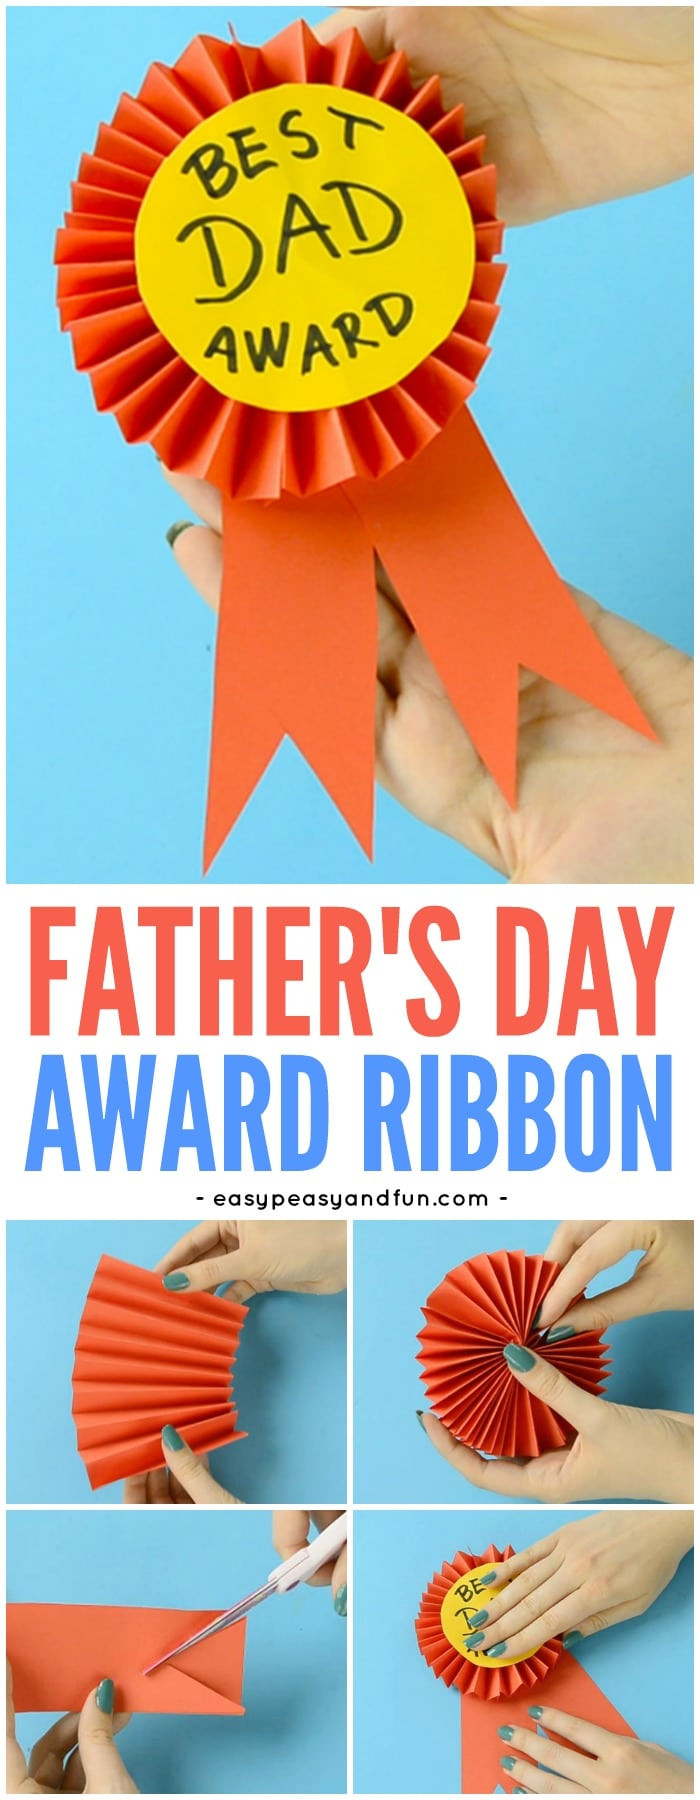 Father Day Craft Ideas Toddlers
 DIY Paper Award Ribbon Father s Day Craft Idea Easy